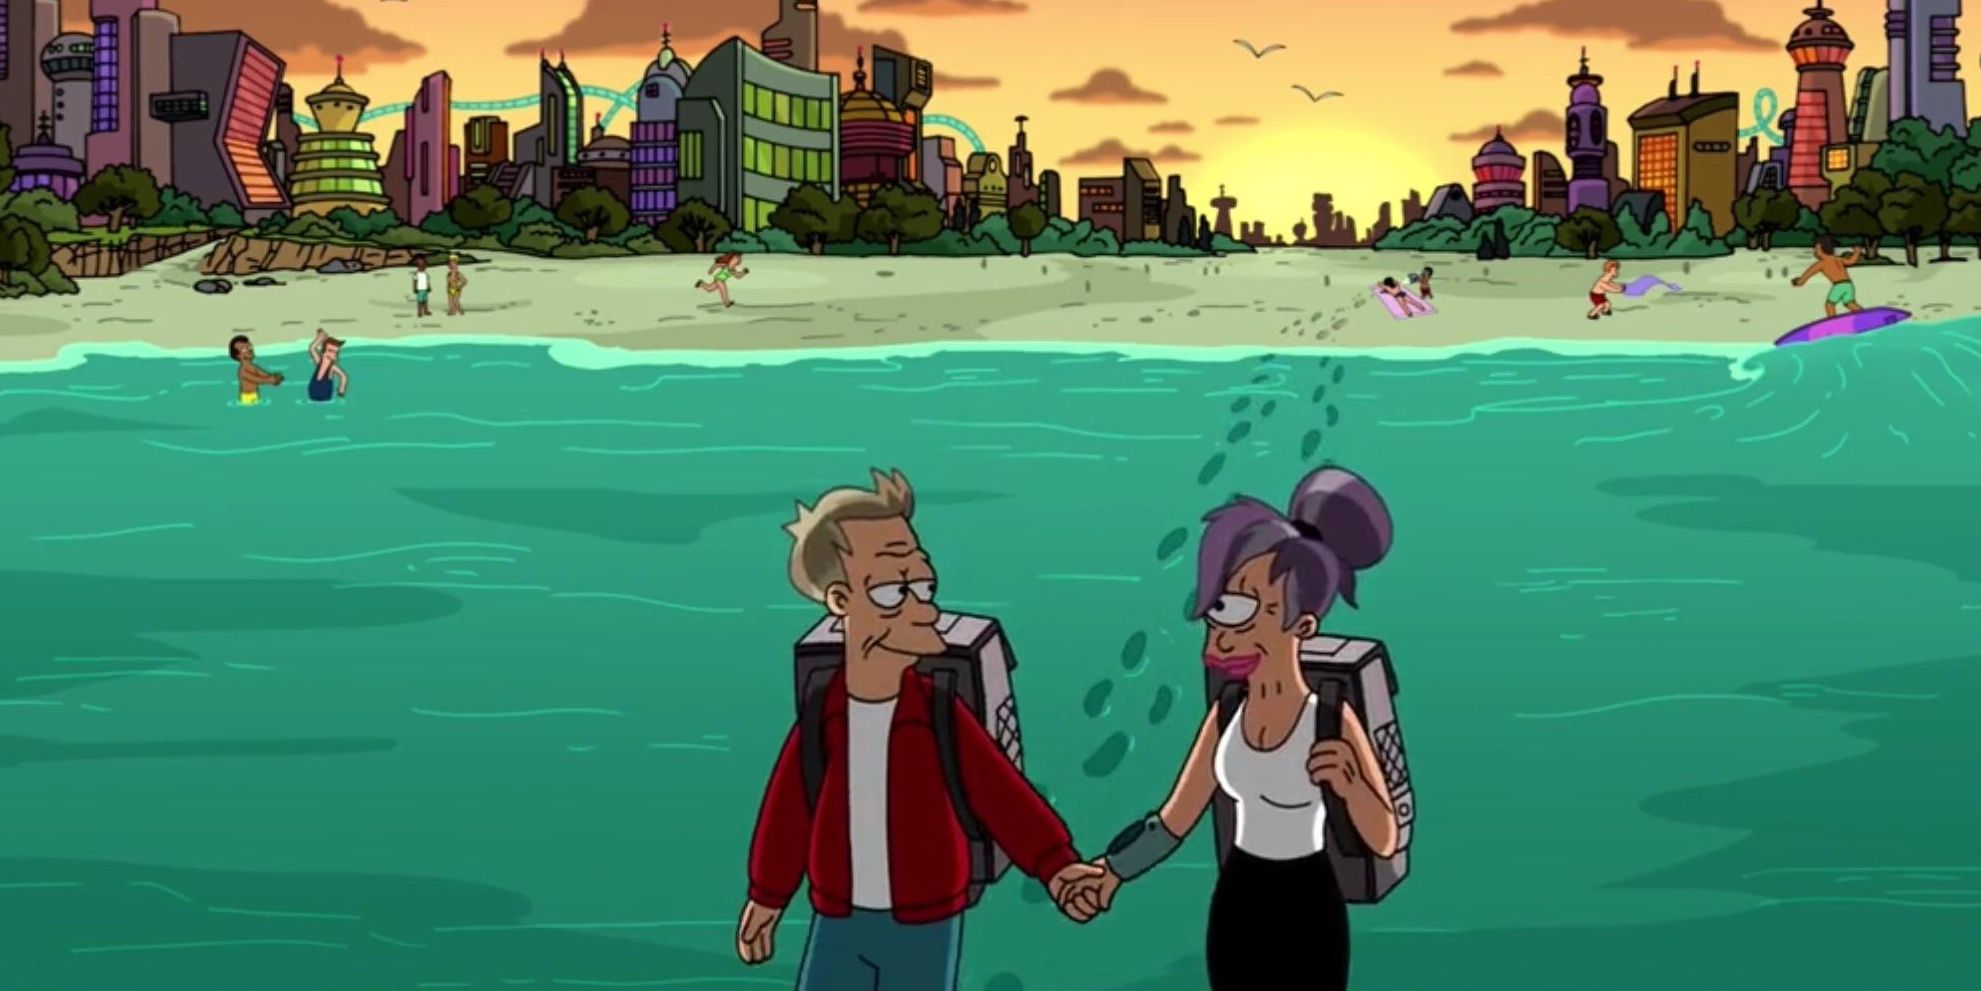 The Best Episode of Futurama From Each Season Ranked (According to IMDB)